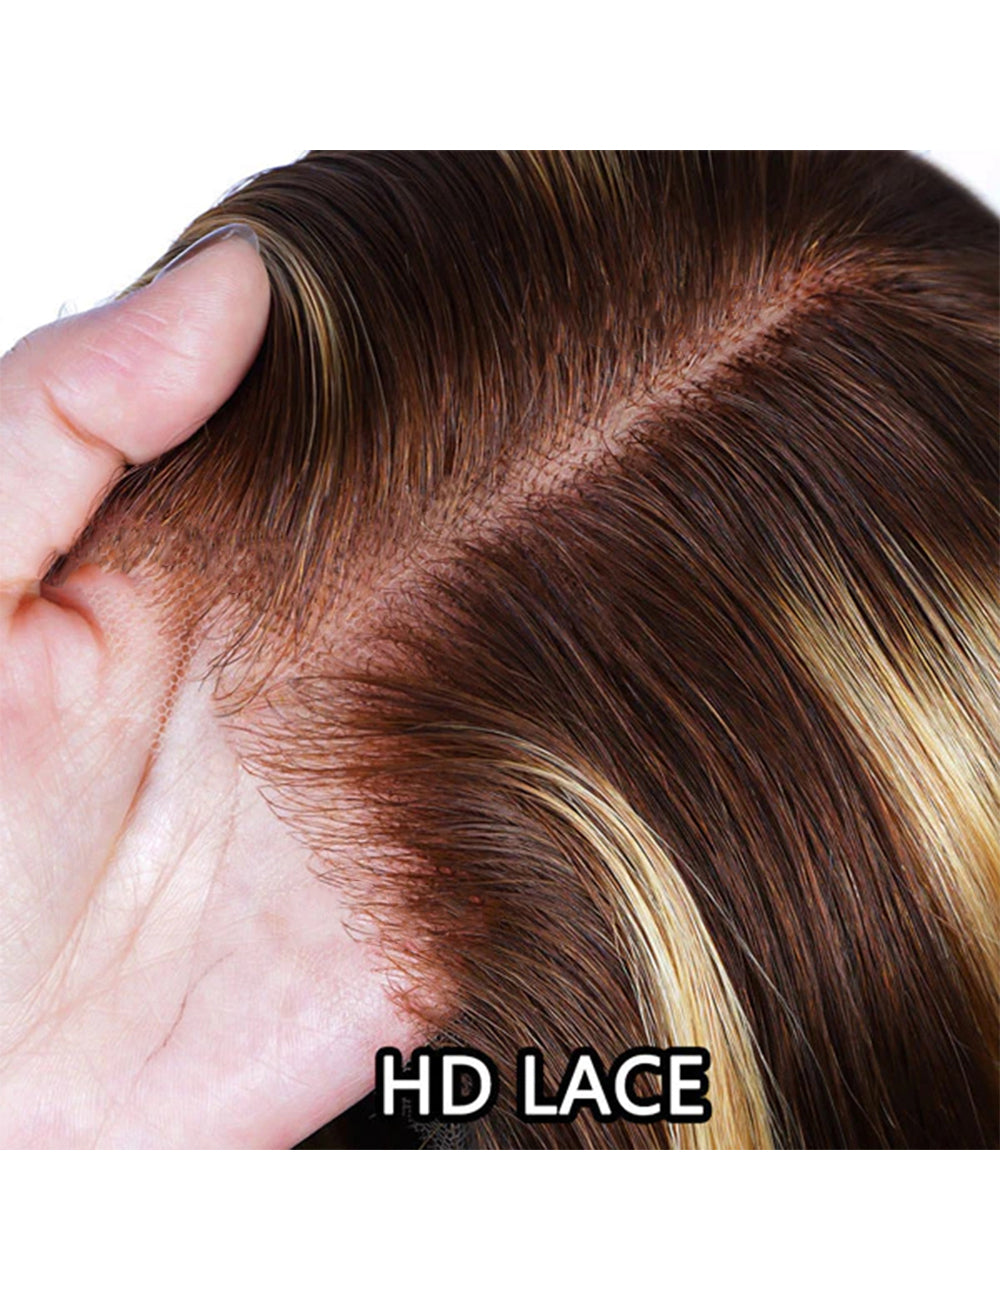 Invisible Knots HD Lace Balayage Straight Human Hair Wigs Wear Go Highlighted Honey Blonde P4/27 Pre Cut Wigs